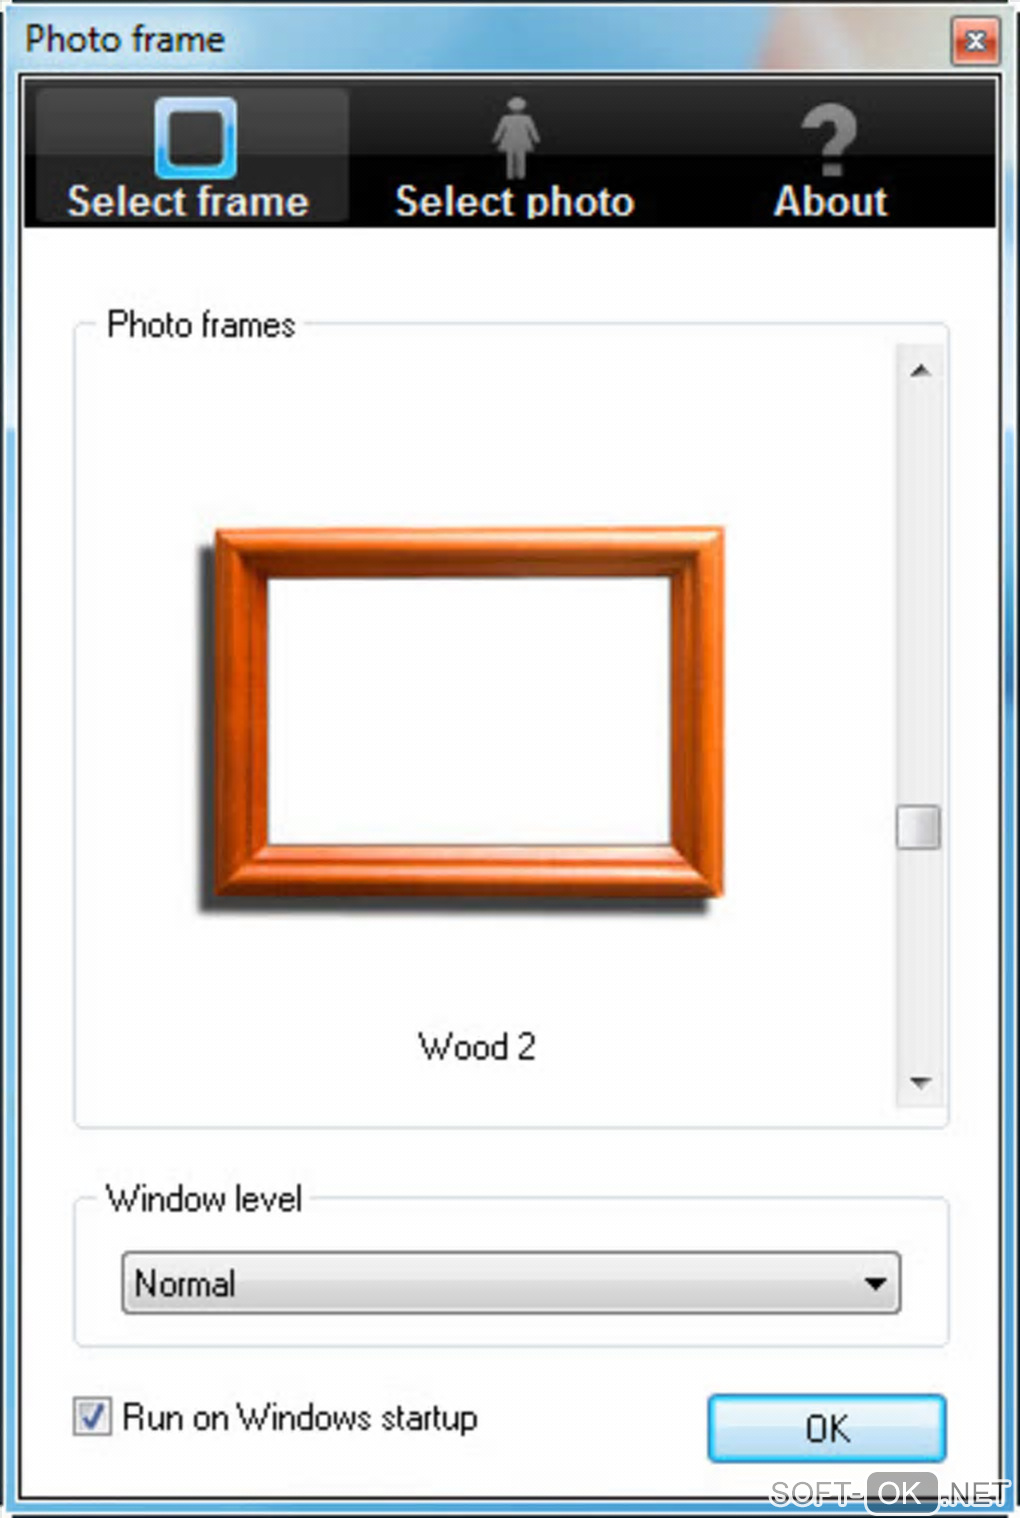 The appearance "Free Photo Frame"